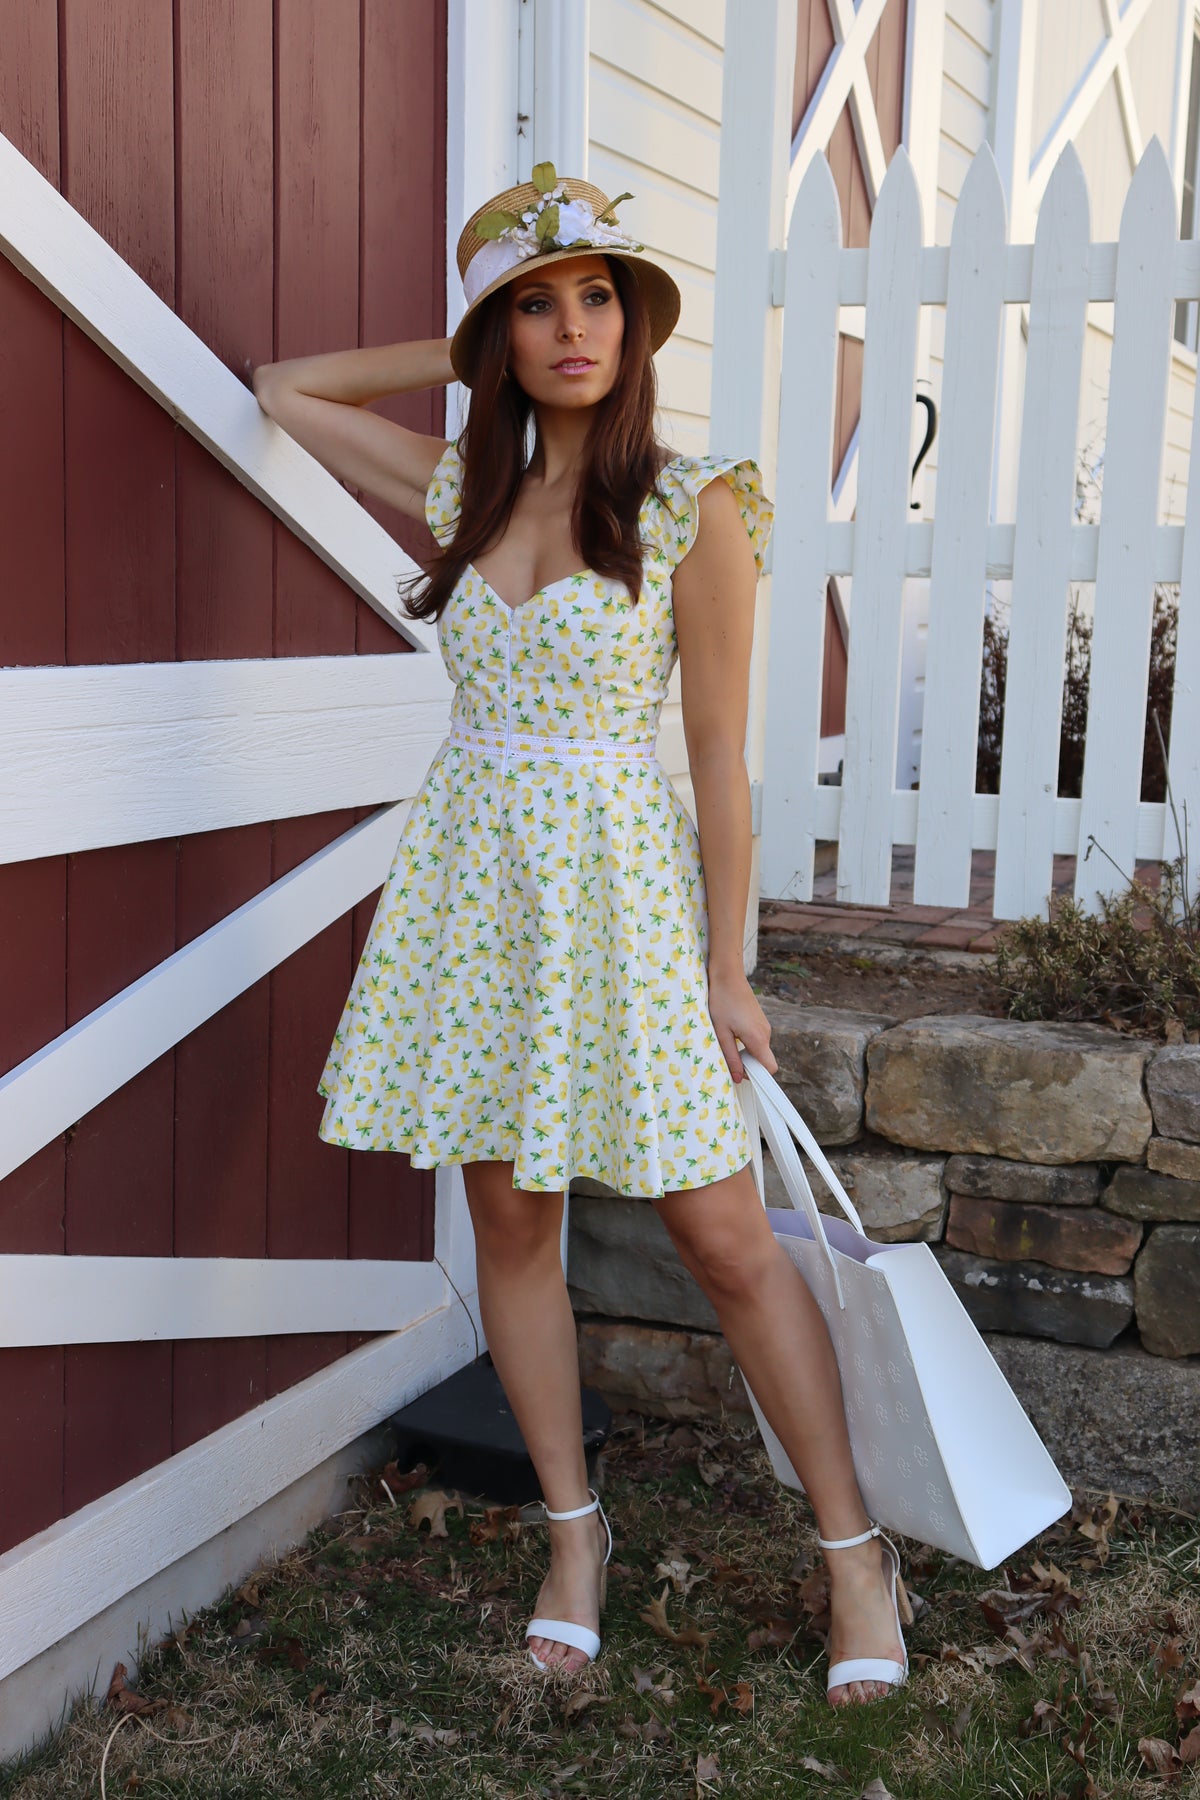 Model in lemon print dress  wearing a straw hat in front  of a barn, with left arm propped up against the barn looking off to the right.